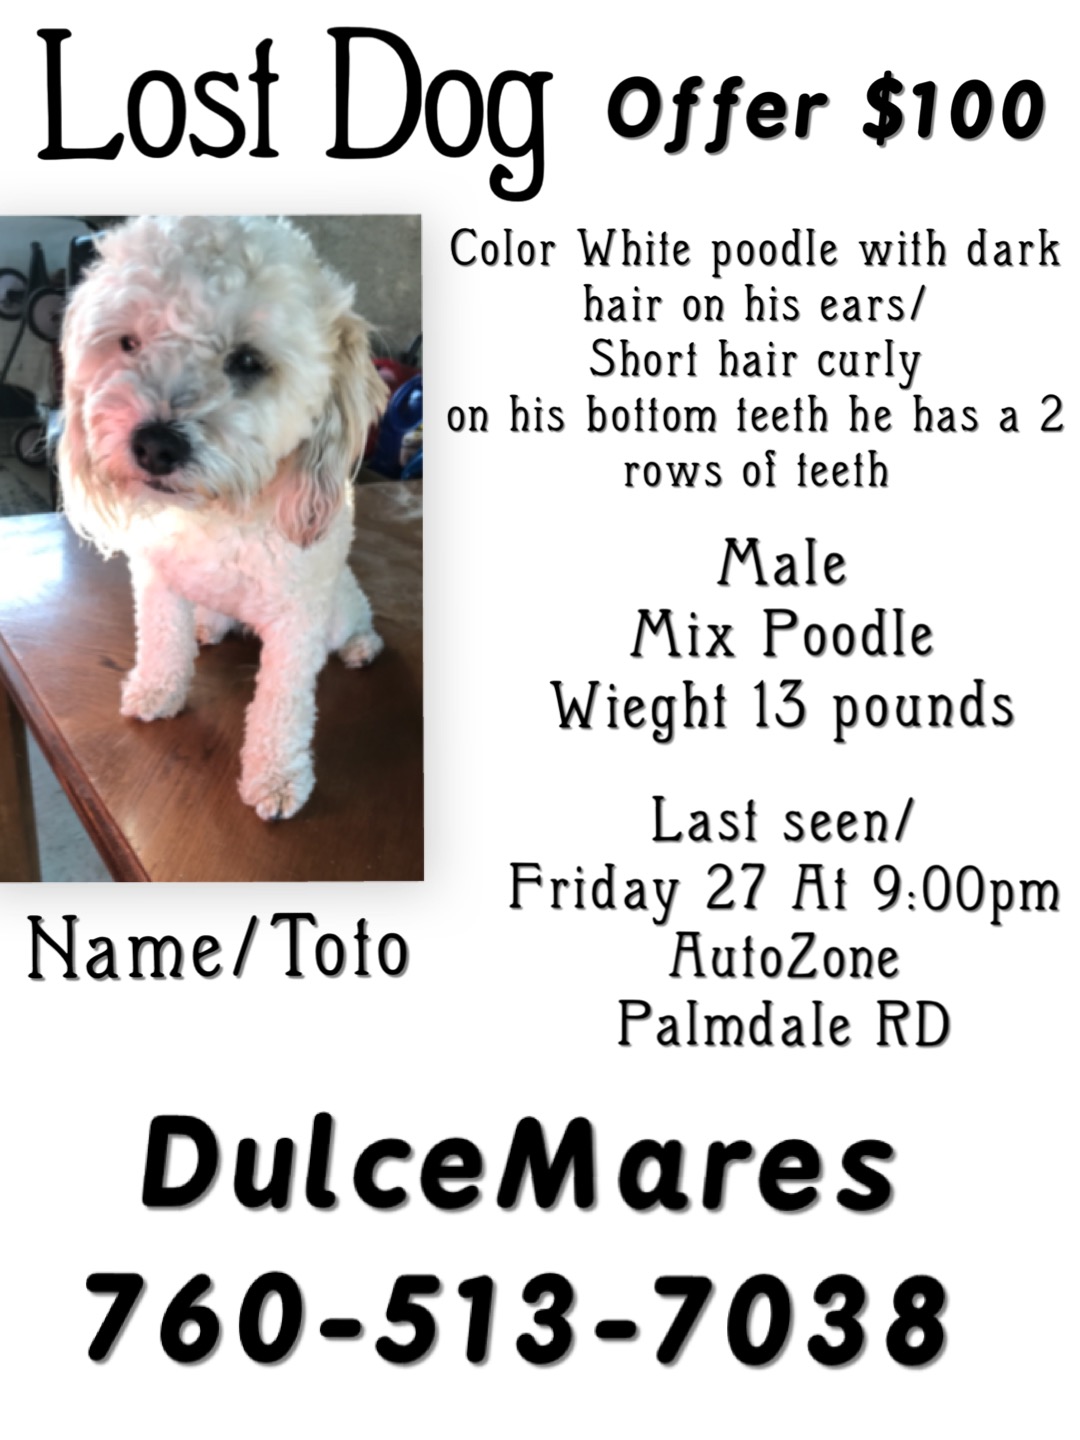 Image of Toto Mares, Lost Dog